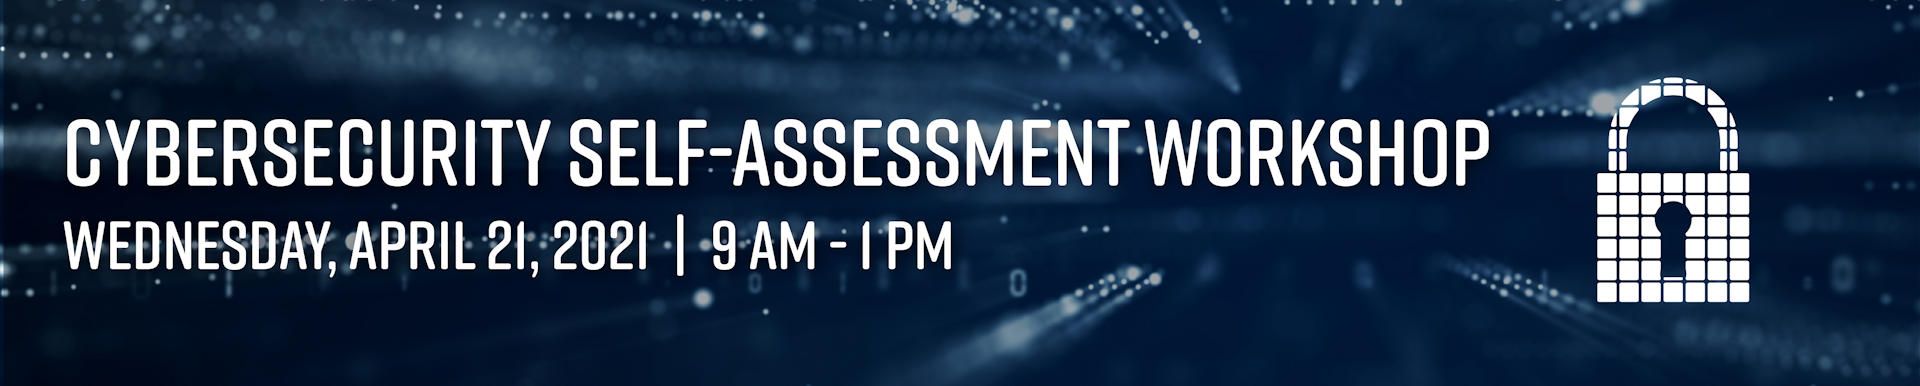 Cybersecurity Self-Assessment Workshop